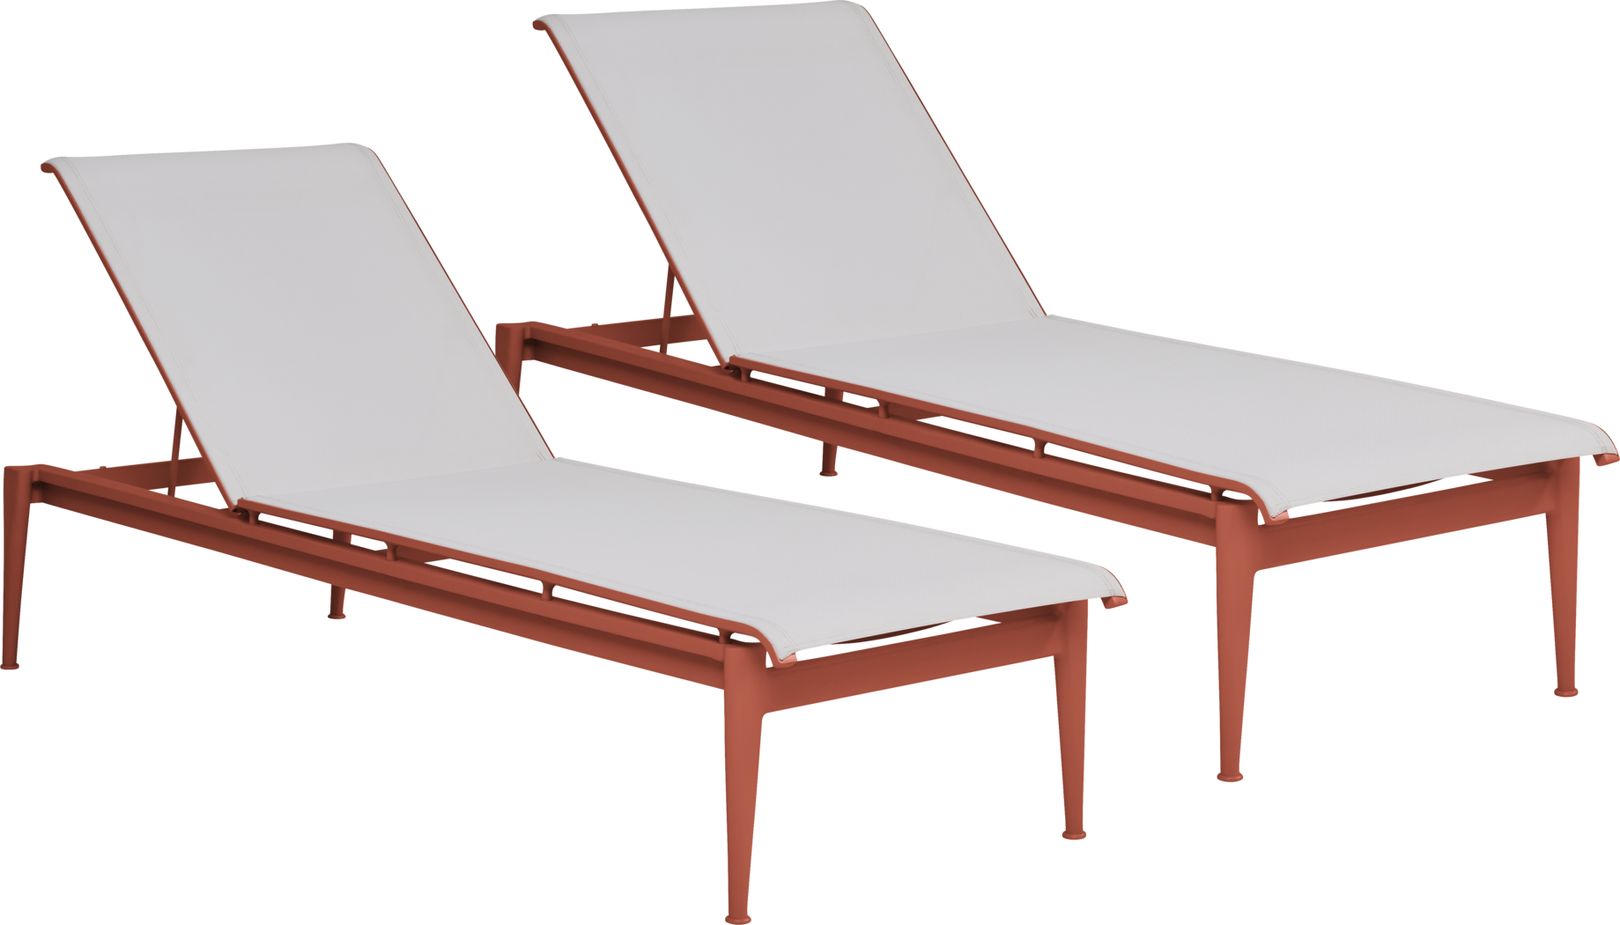 Photo of a pair of teak outdoor chaise lounges with ivory sling seats poolside